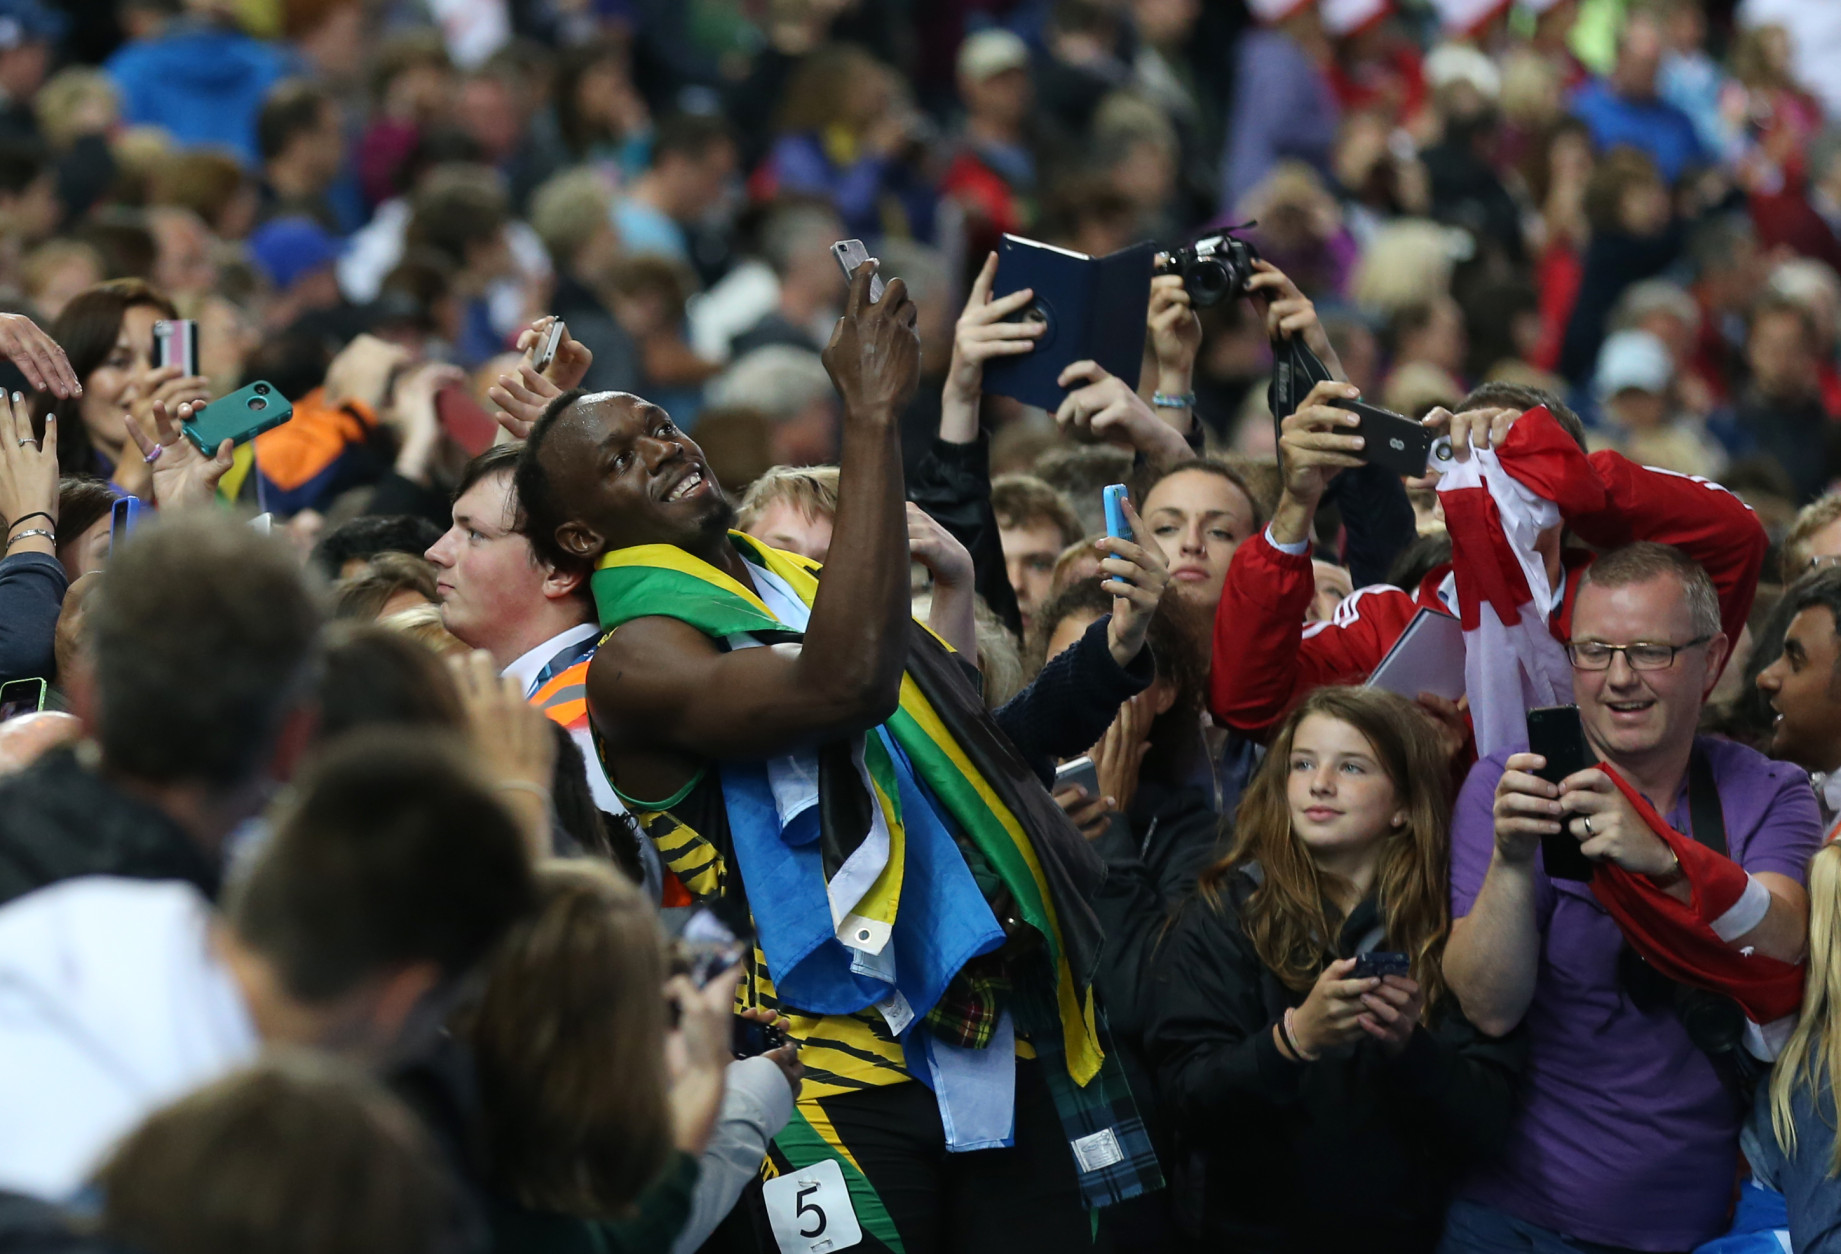 FOR USE AS DESIRED, YEAR END PHOTOS - FILE - Usain Bolt of Jamaica takes a photo on a smart phone with a member of the crowd as he walks round Hampden Park Stadium after he competed in the men's 4x100 meter relay race during the Commonwealth Games 2014 in Glasgow, Scotland, Saturday Aug. 2, 2014. (AP Photo/ Scott Heppell, File)